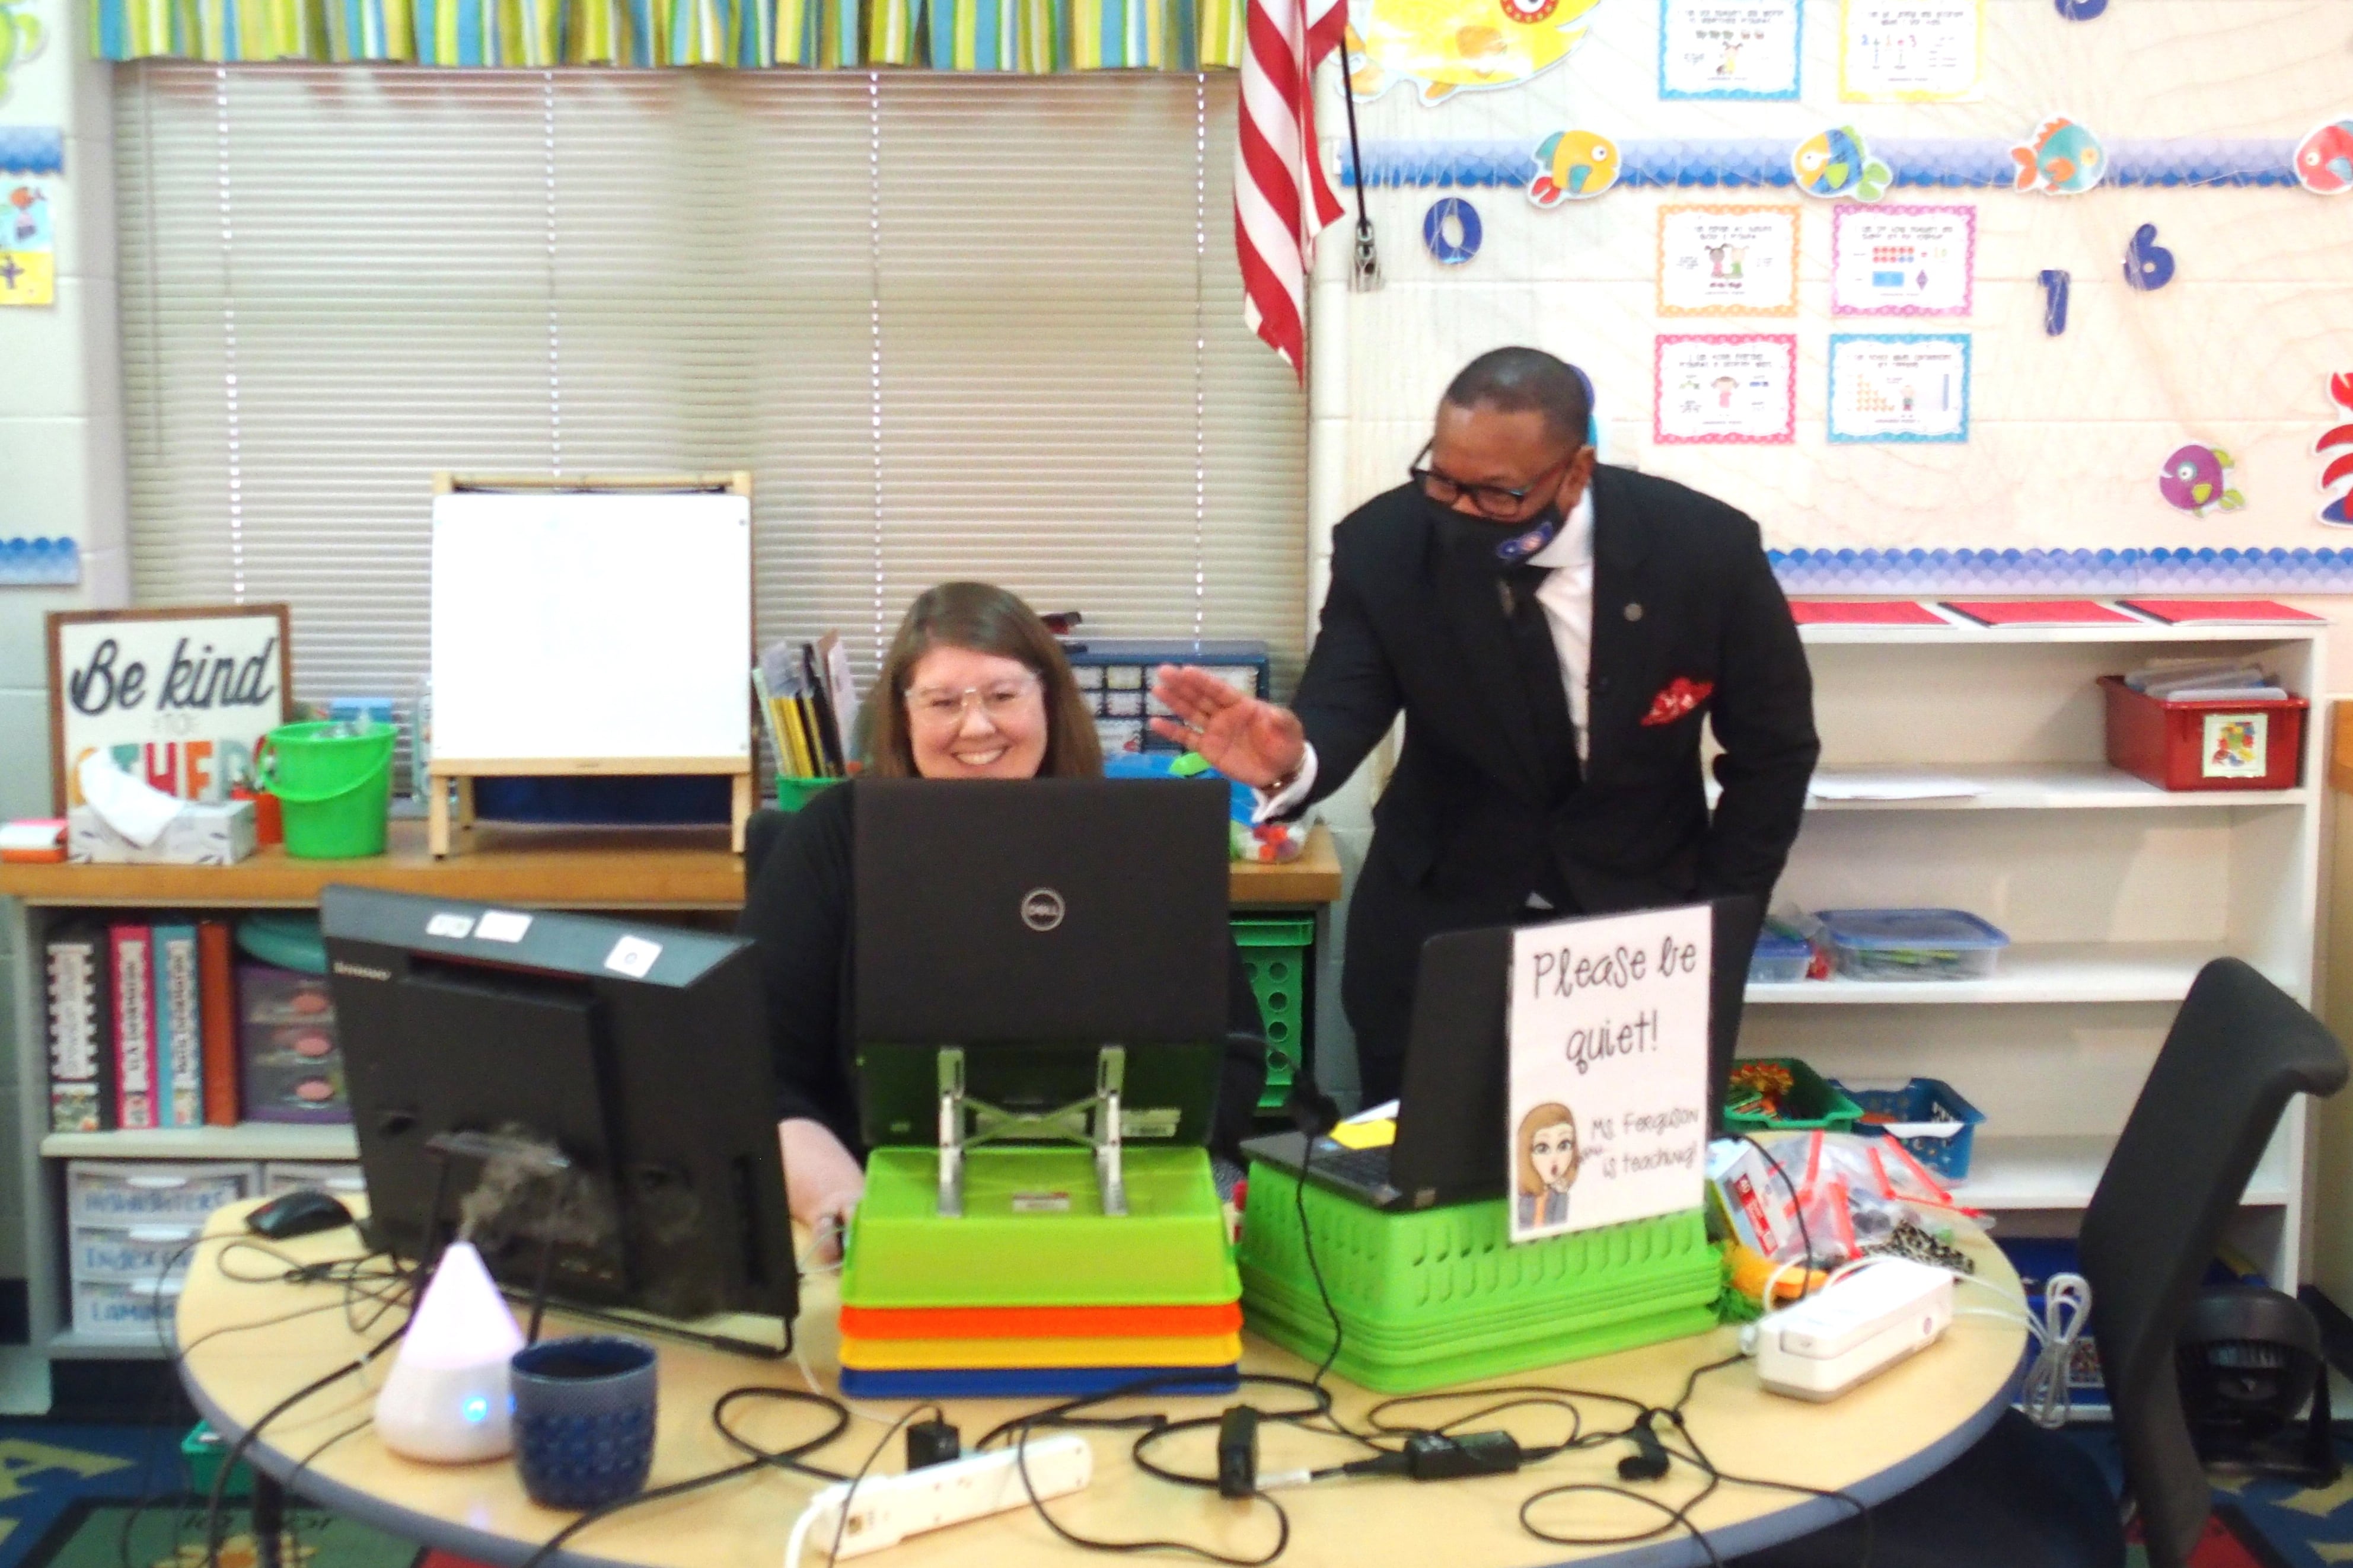 Superintendent Joris Ray bends down to wave at kindergarten students on a laptop screen who are in an online class while their teacher smiles at her desk.